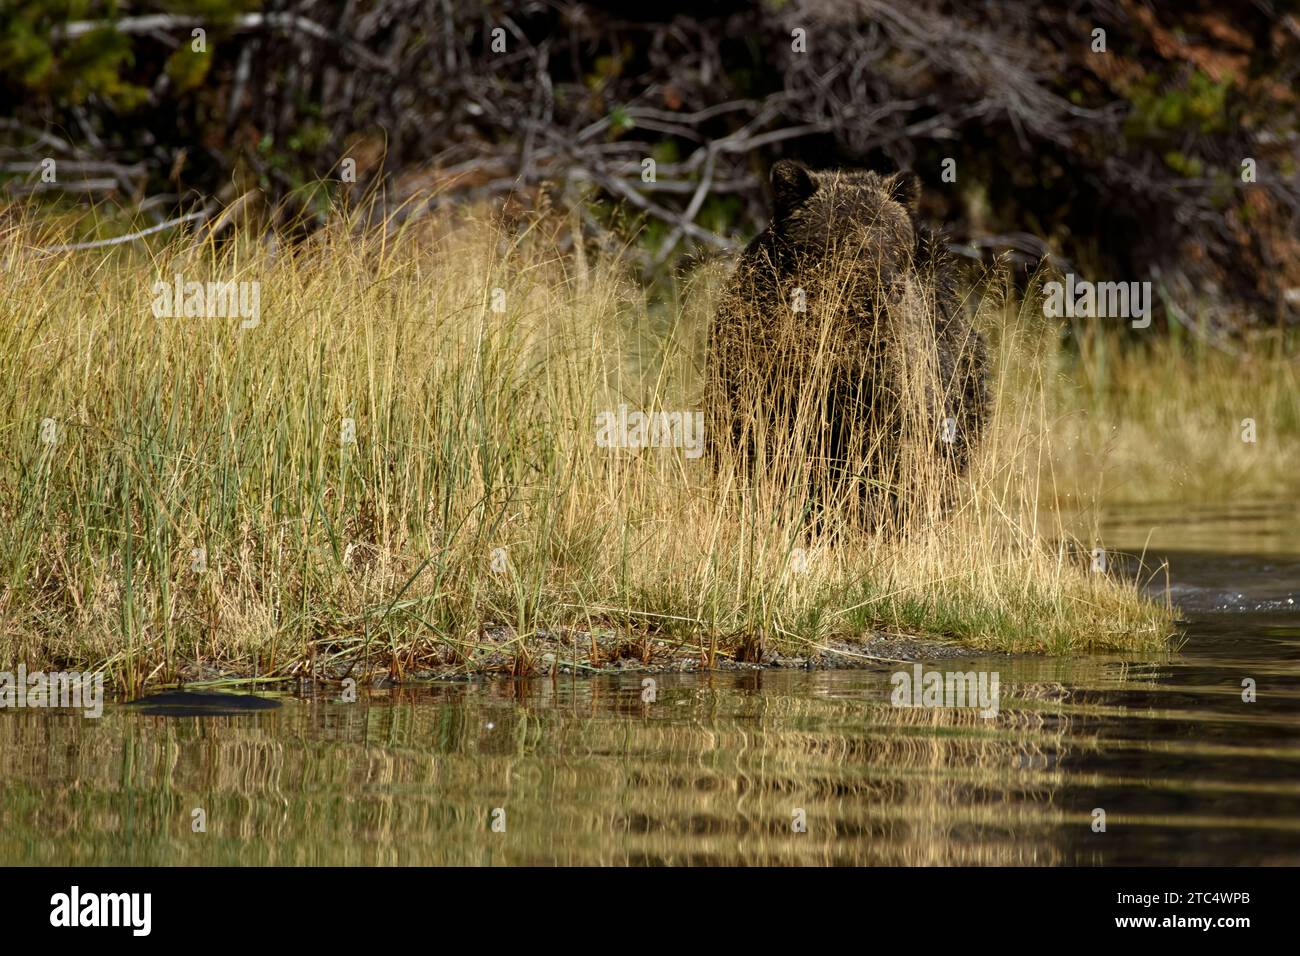 Grizzly bear peeking out from the tall sedge grass, Chilko River, BC Stock Photo